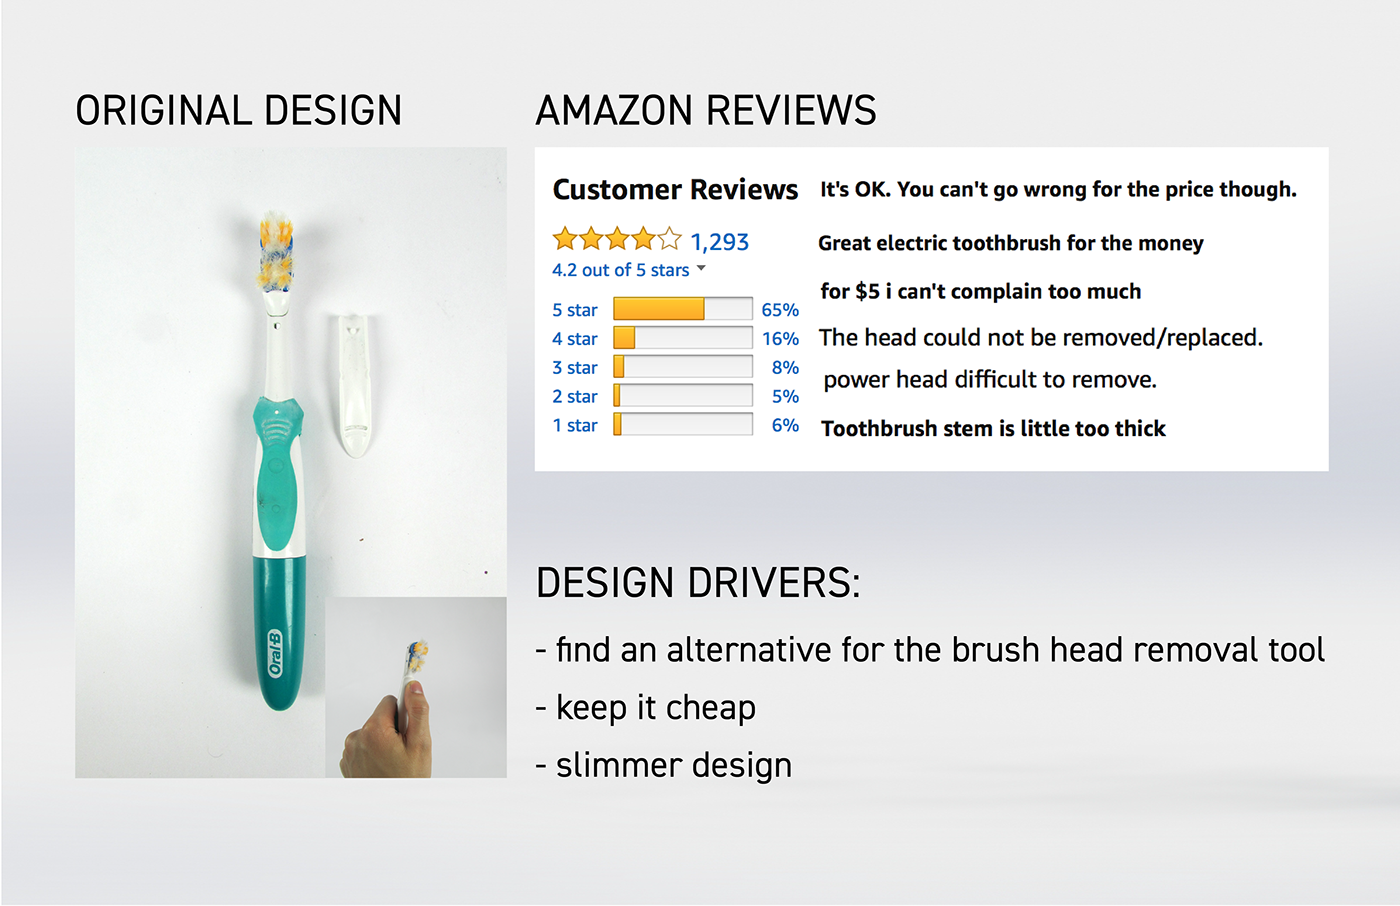 Solidworks cad 3d modeling toothbrush oral b redesign